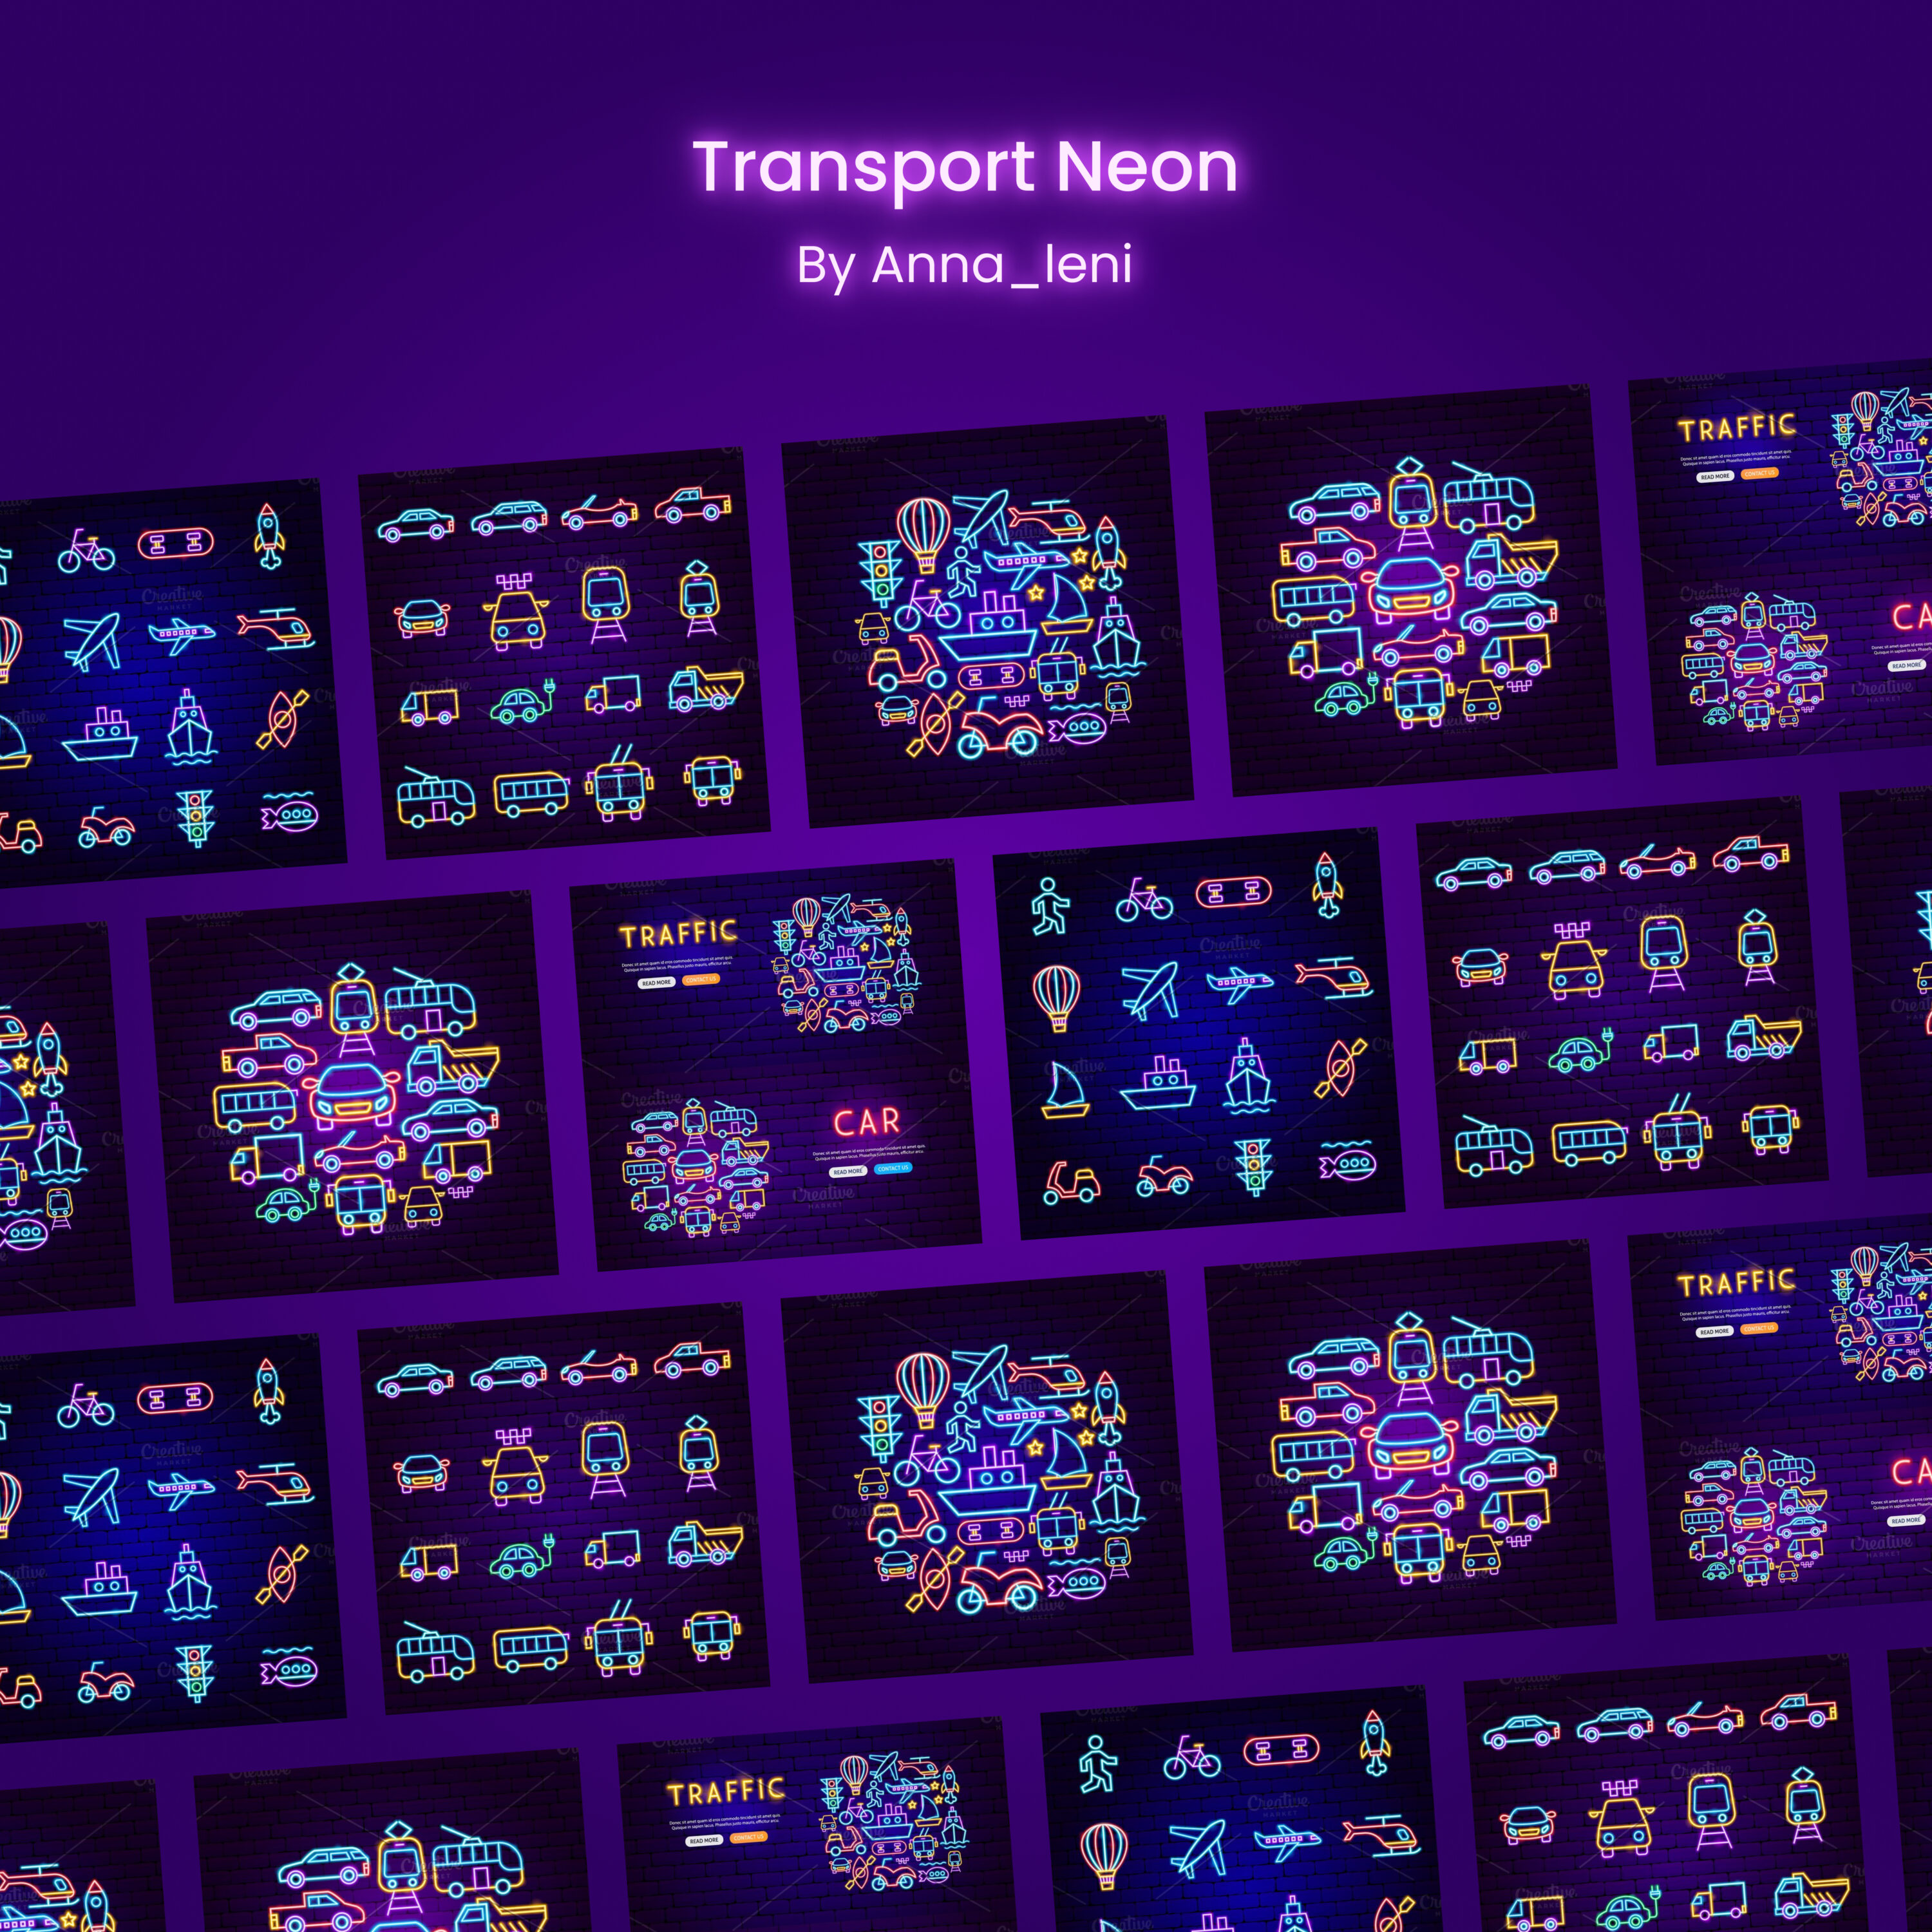 Transport neon preview.